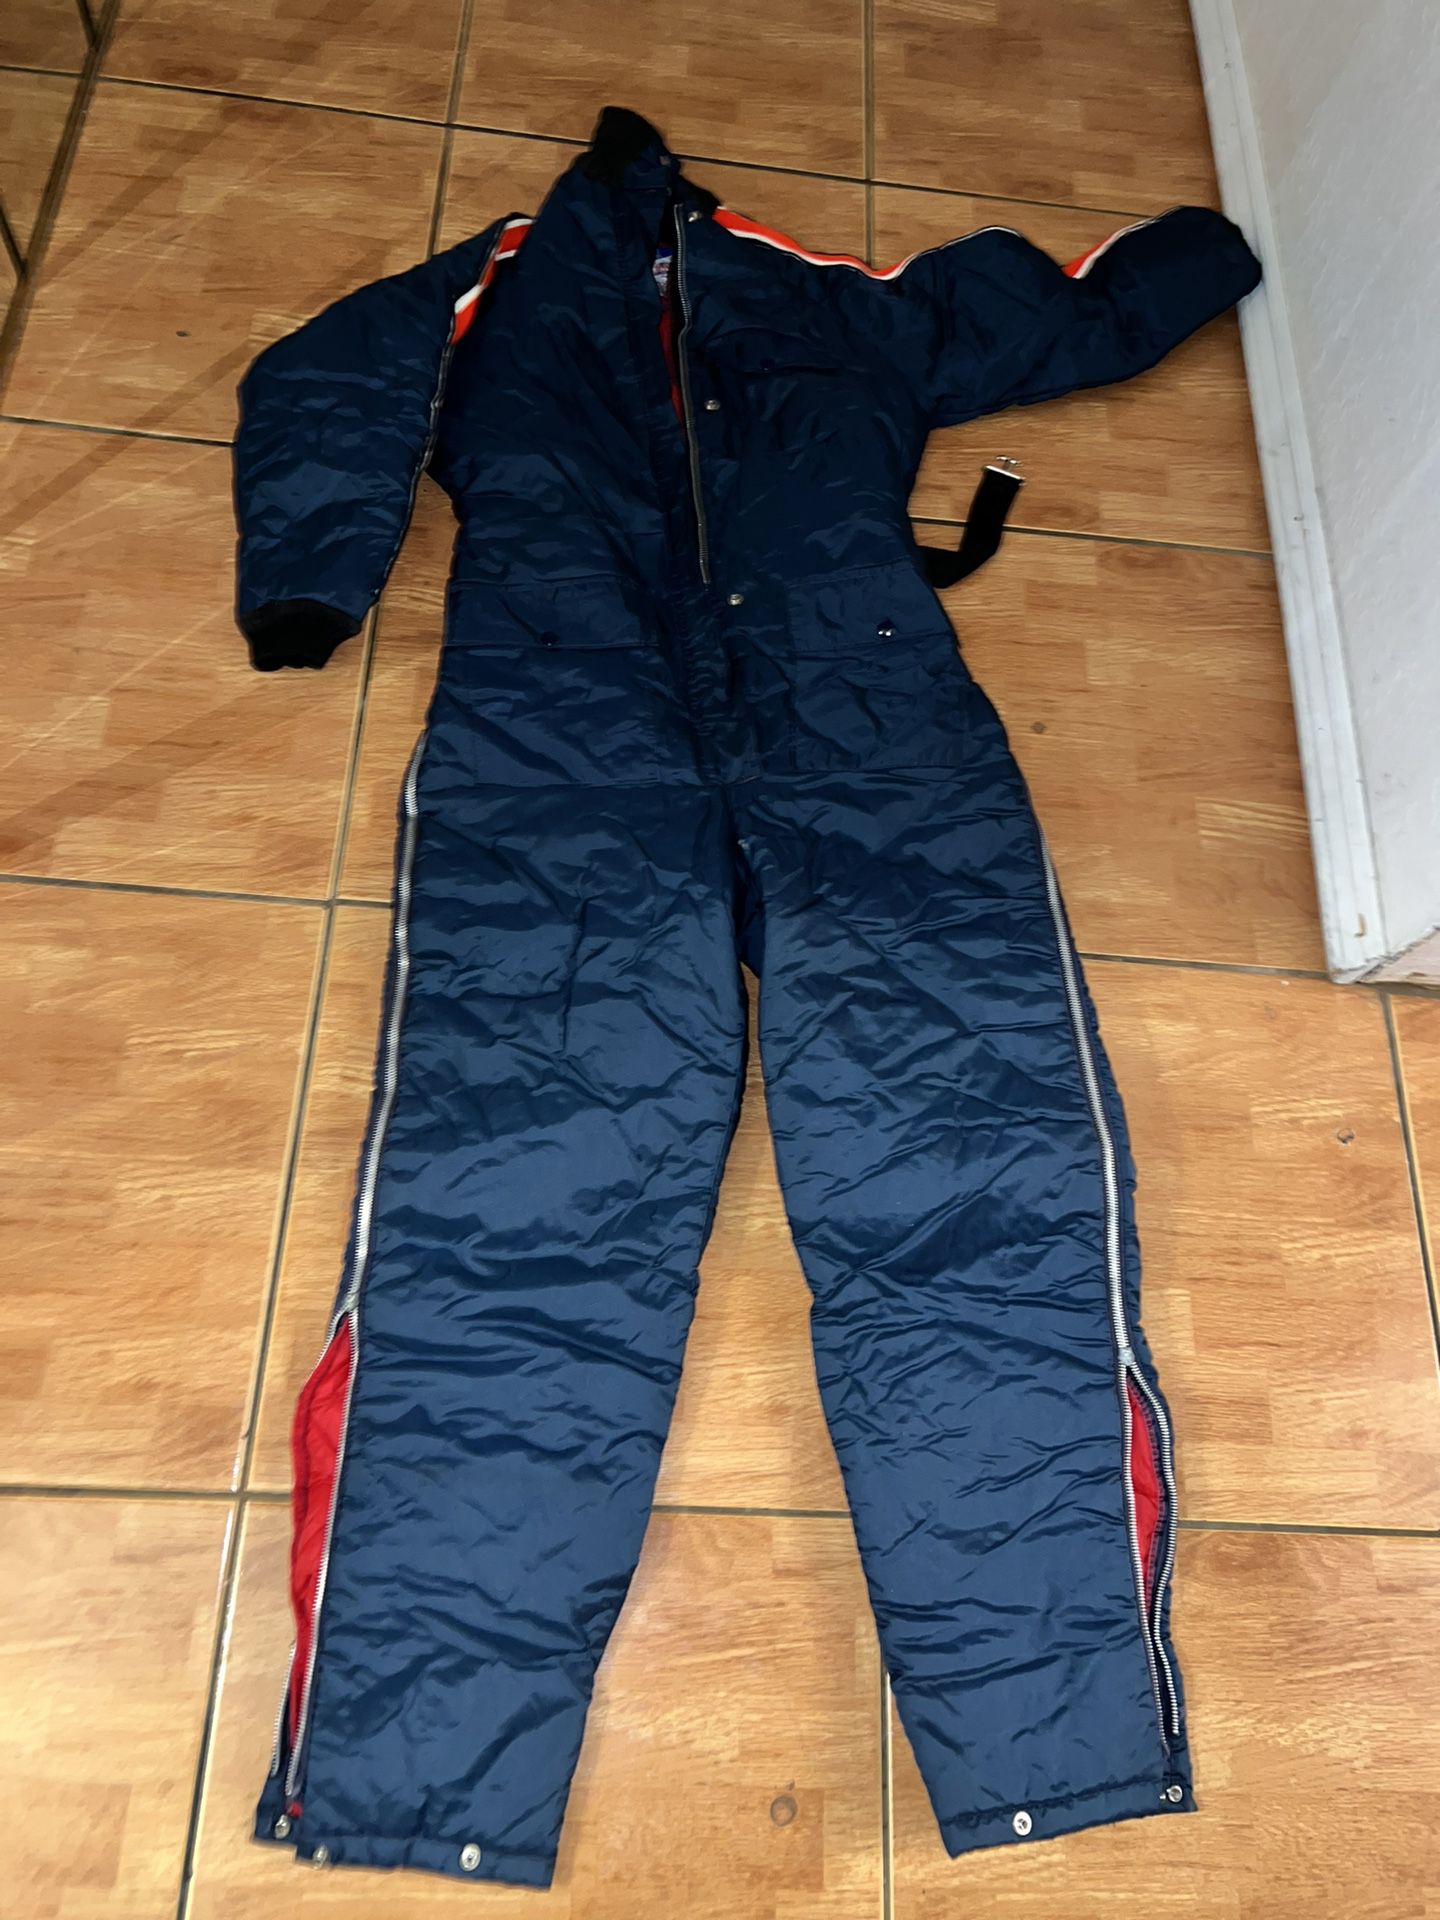 Snowmobile Montgomery Ward Suit 